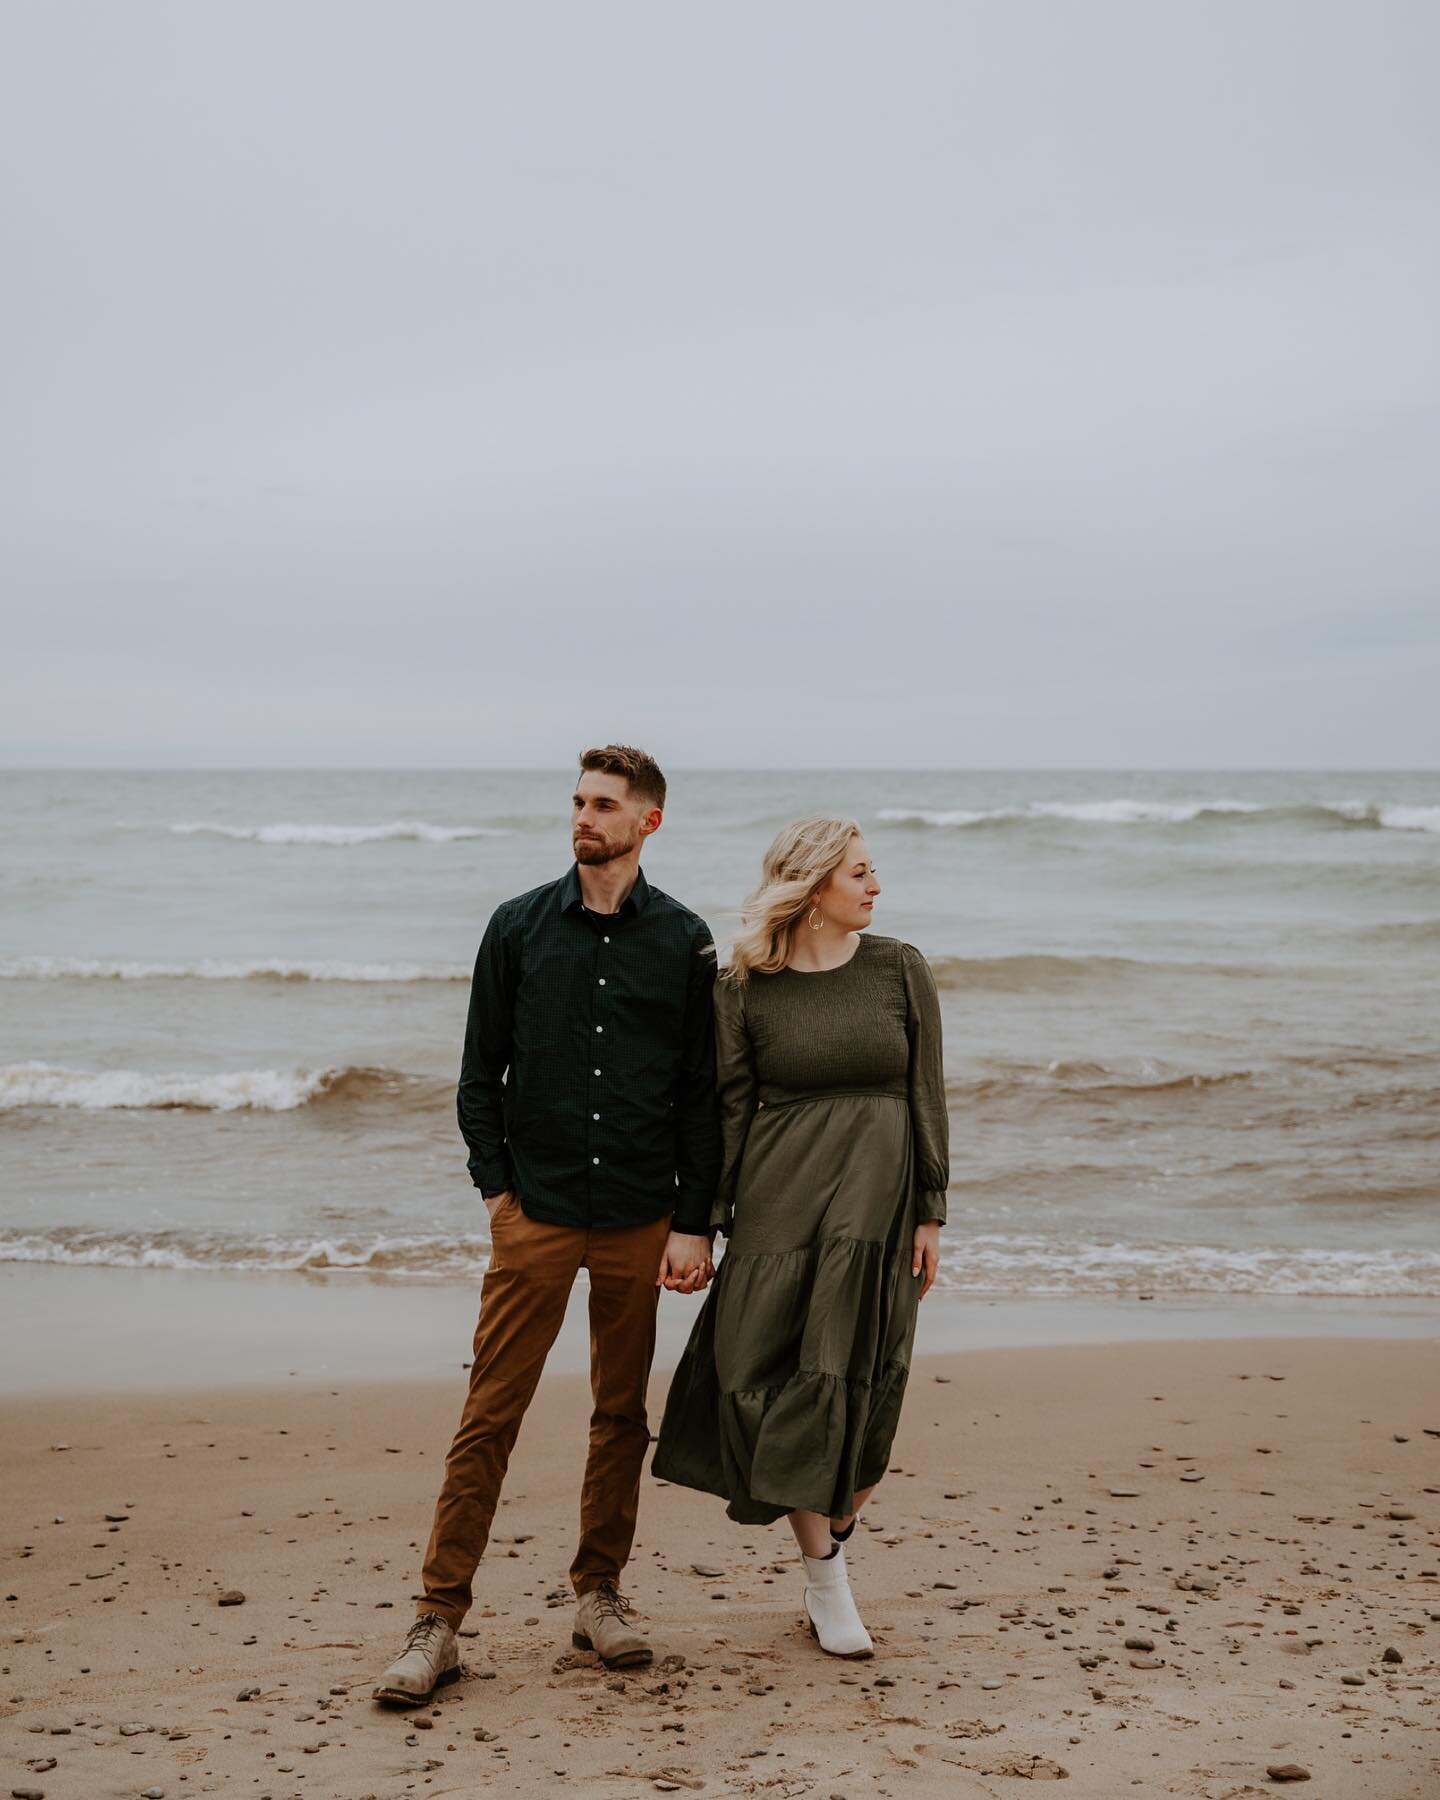 Going to the beach when it&rsquo;s barely 30 degrees is not ideal but  it still makes for some hella cute engagement photos! Always down to freeze my fingers for a good location ❄️
.
.
.
.
#indianapolisweddingphotographer #indianaweddingphotographer 